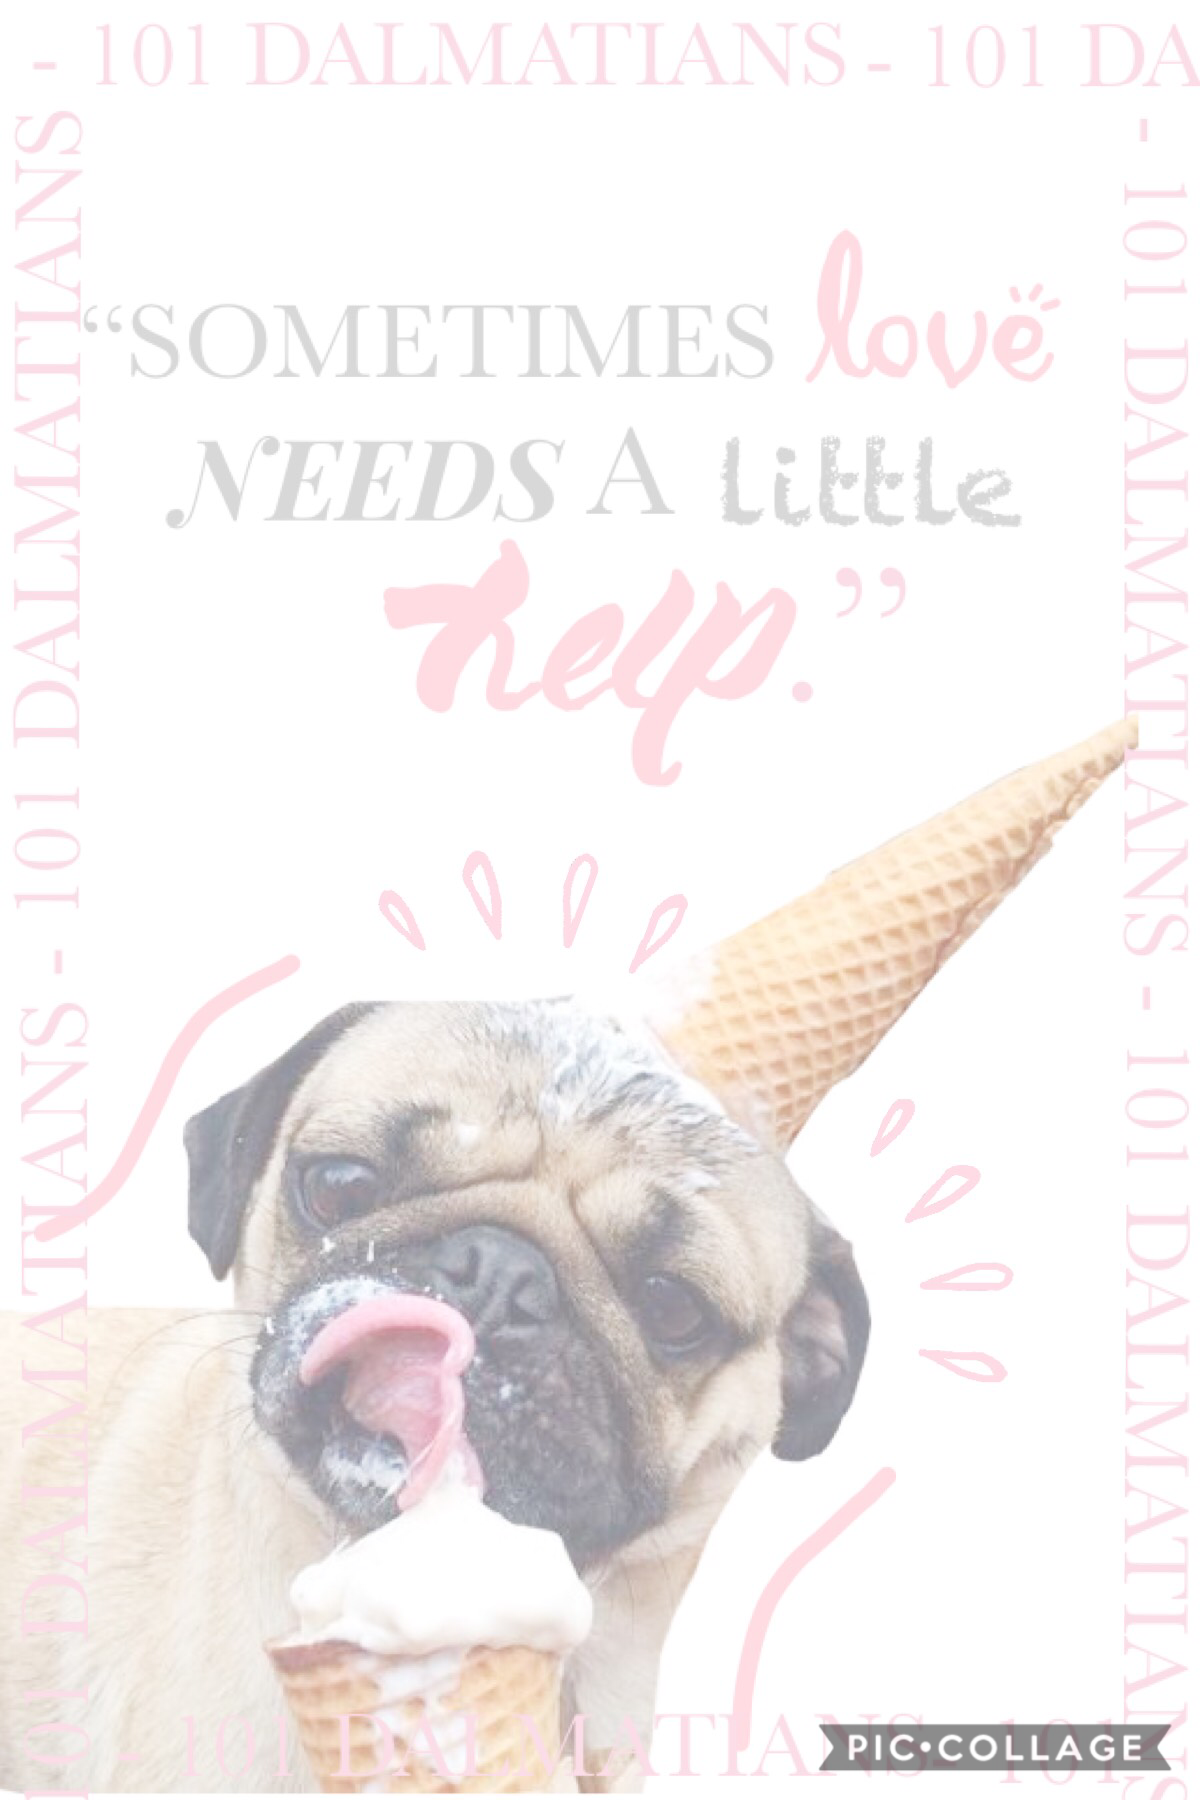 🍦I love pugs! And this pic is adorable! Sorry if it seems like a copy of the last one! List any requests below!🍦